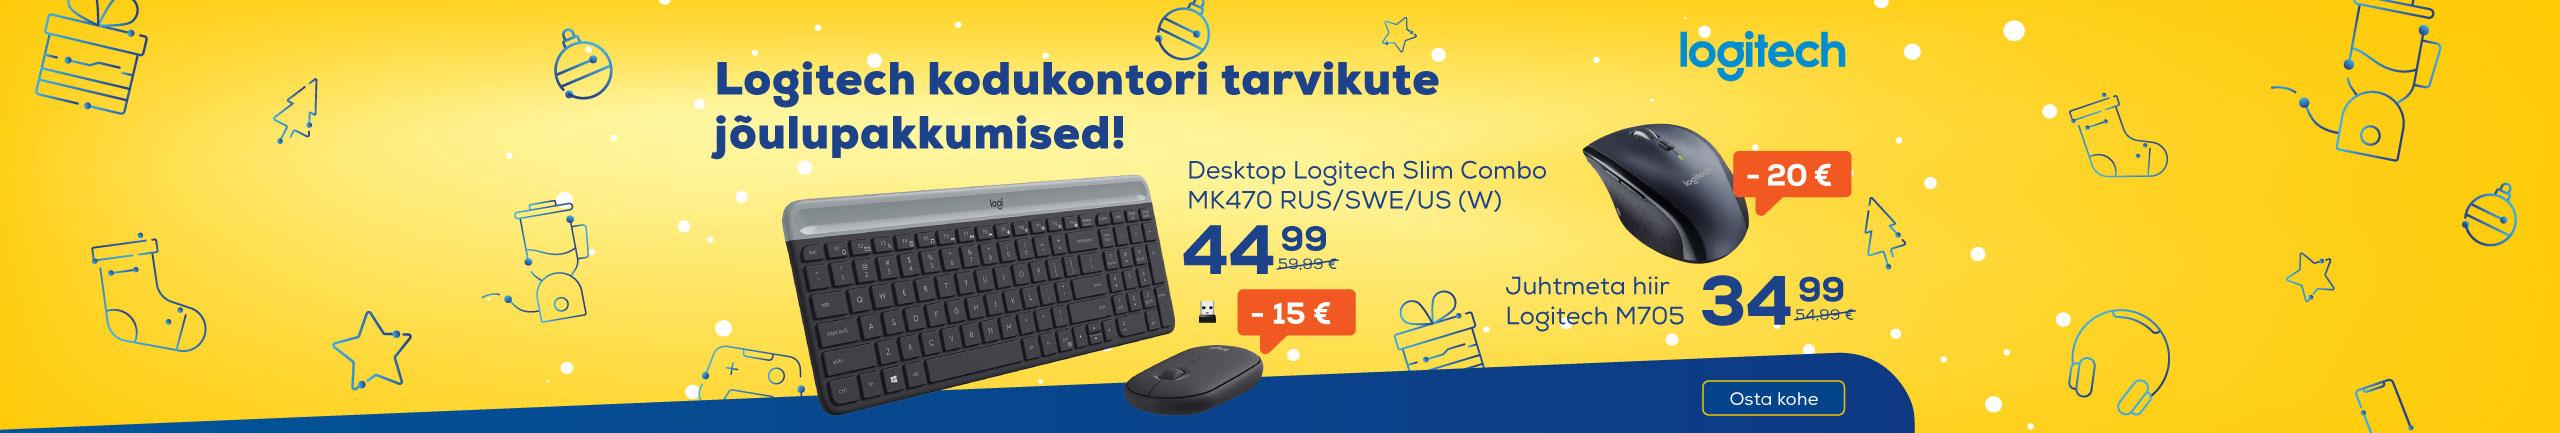 Logitech Christmas offers for home-office accessories!